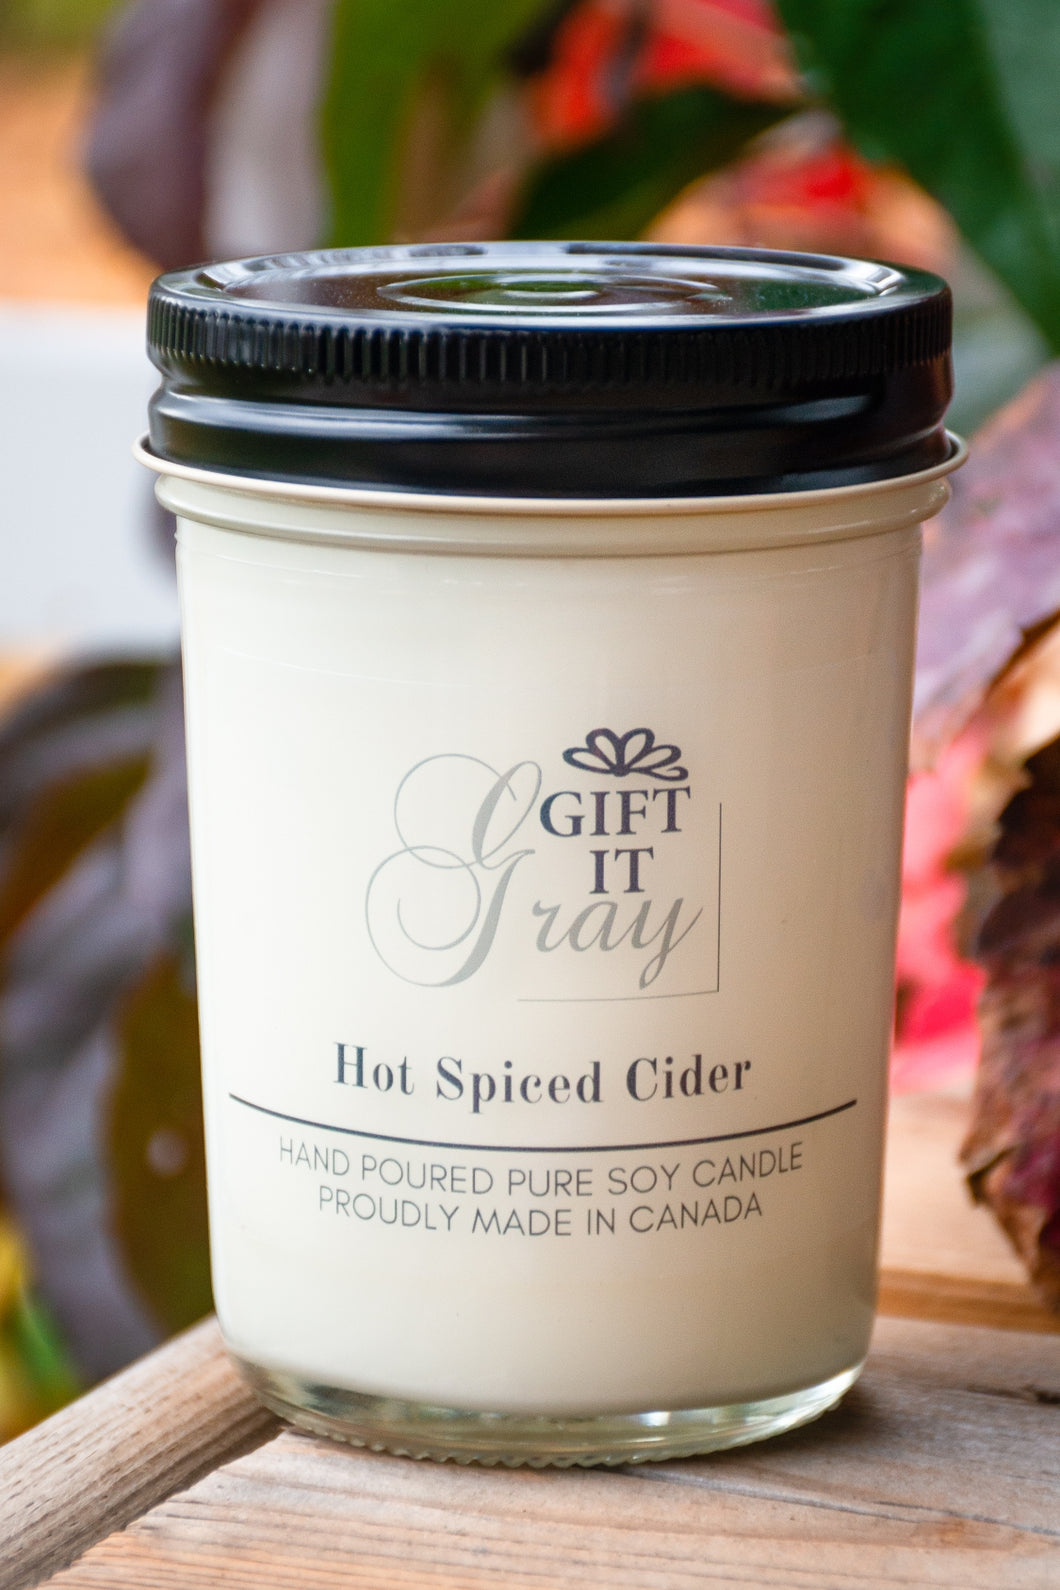 Hot Spiced Cider Gift It Gray Soy Candle